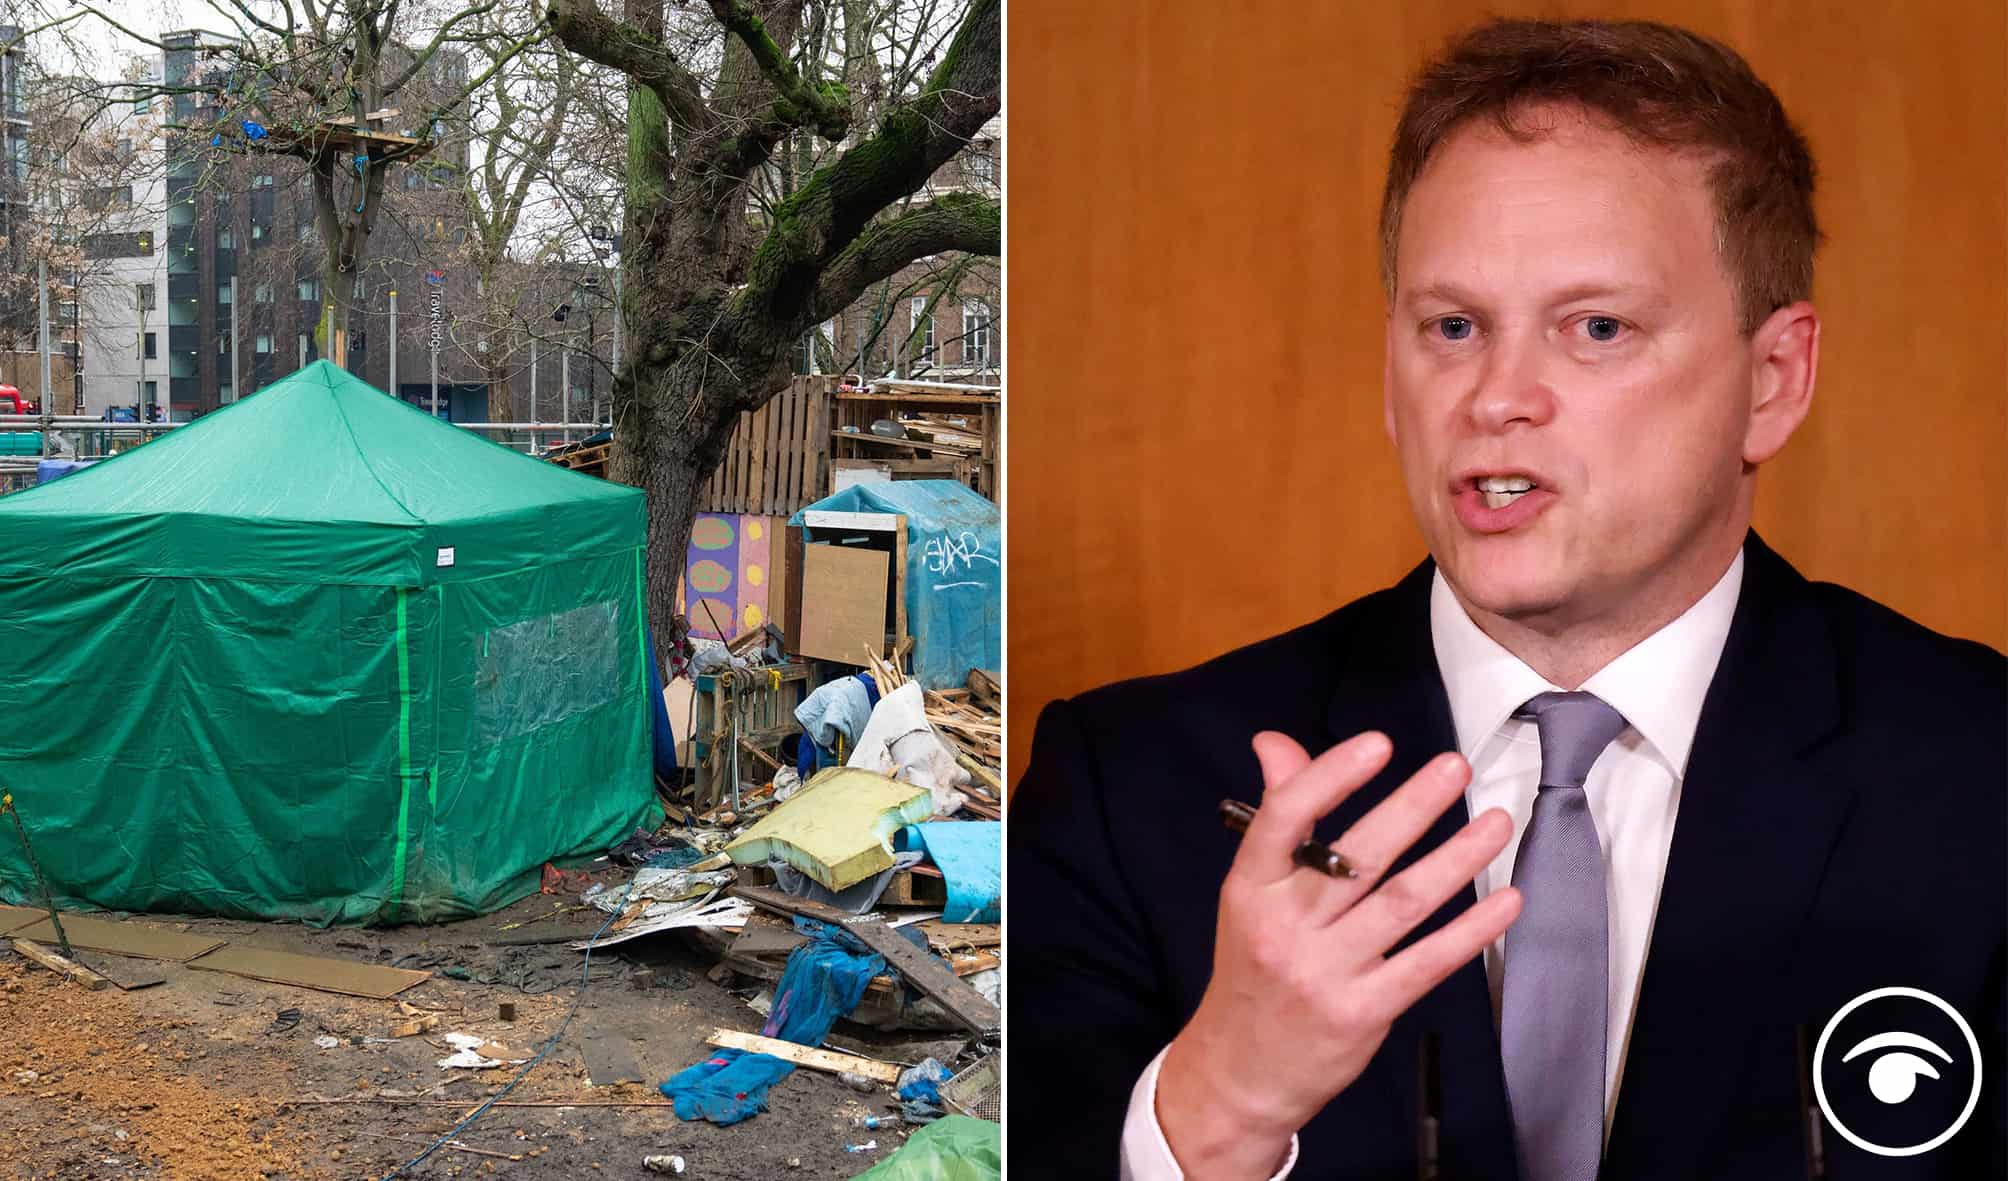 Unless humans can teleport then HS2 is critical, claims Grant Shapps